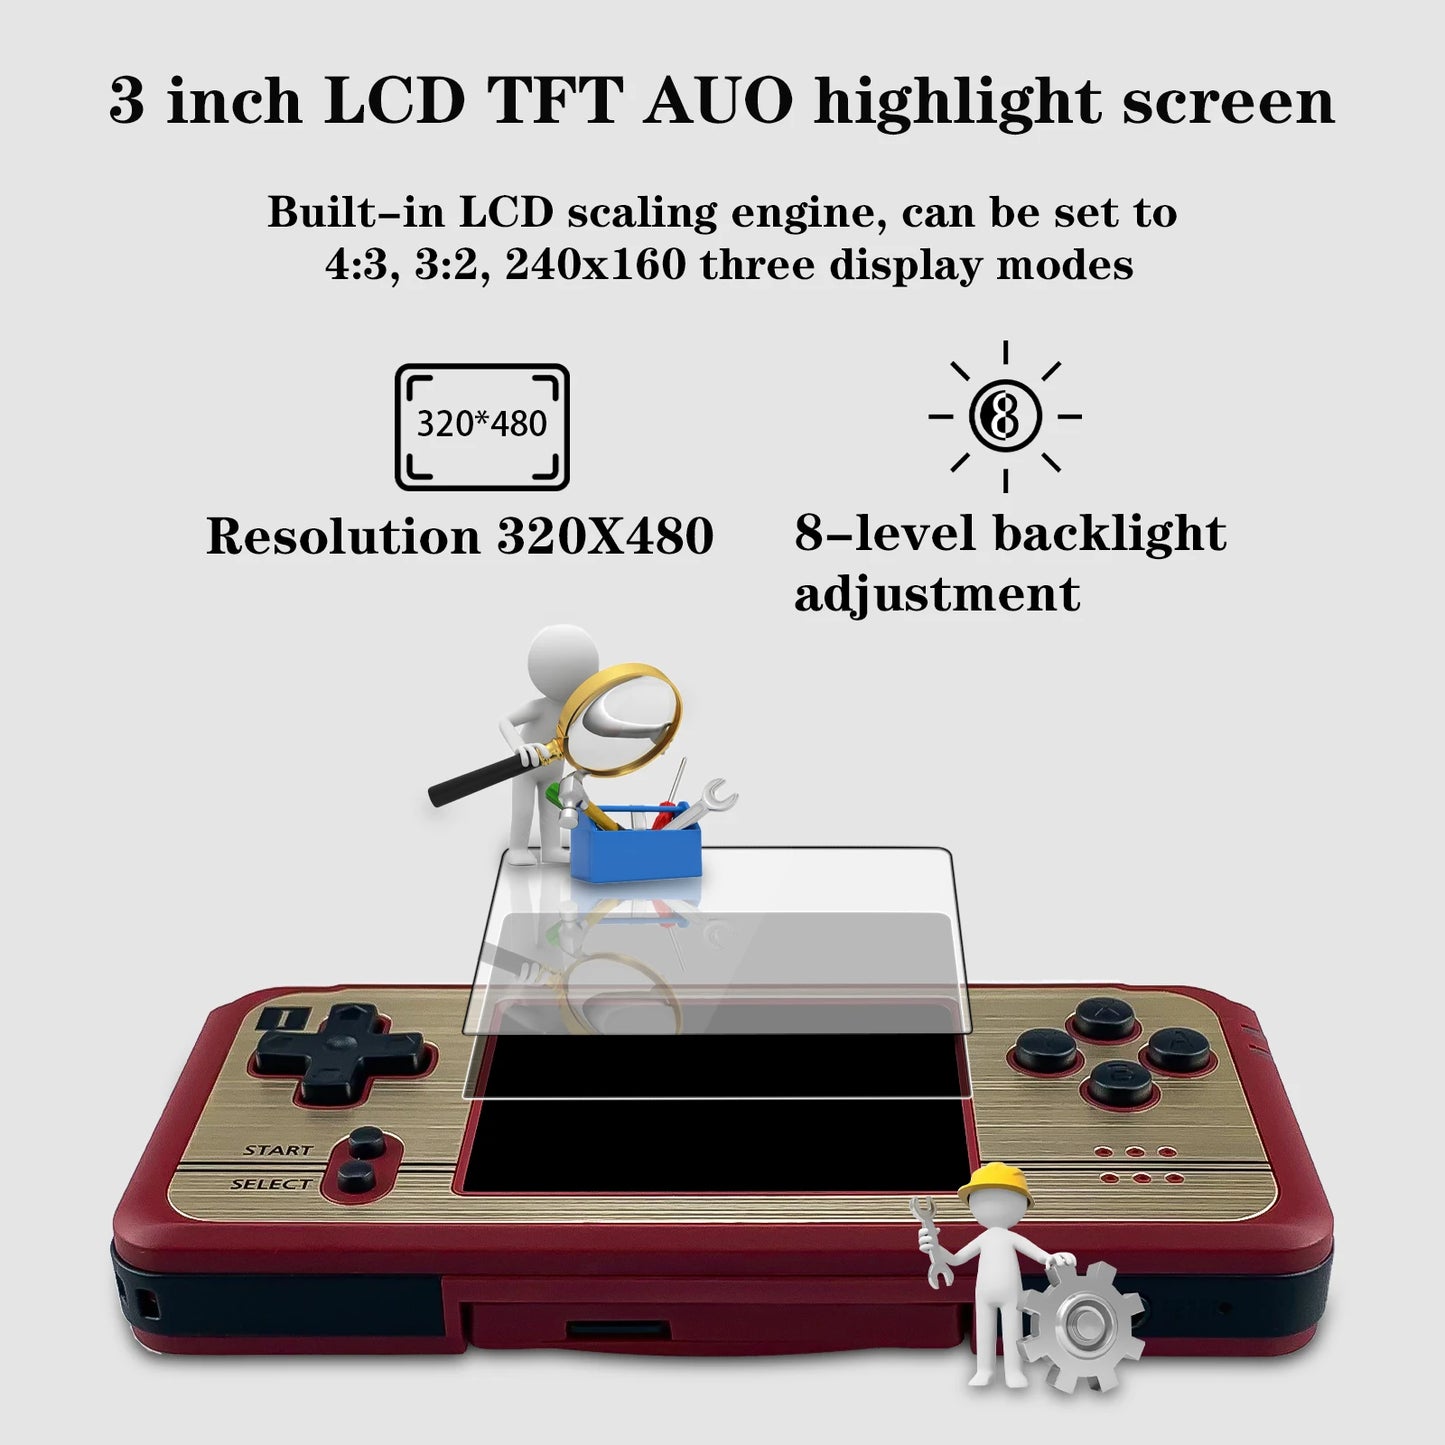 ANBERNIC NEW K101 Plus Handheld Game Player Retro Game 3 inch LCD Screen Video Game Console 32Bit 900 Games G BA Support Console